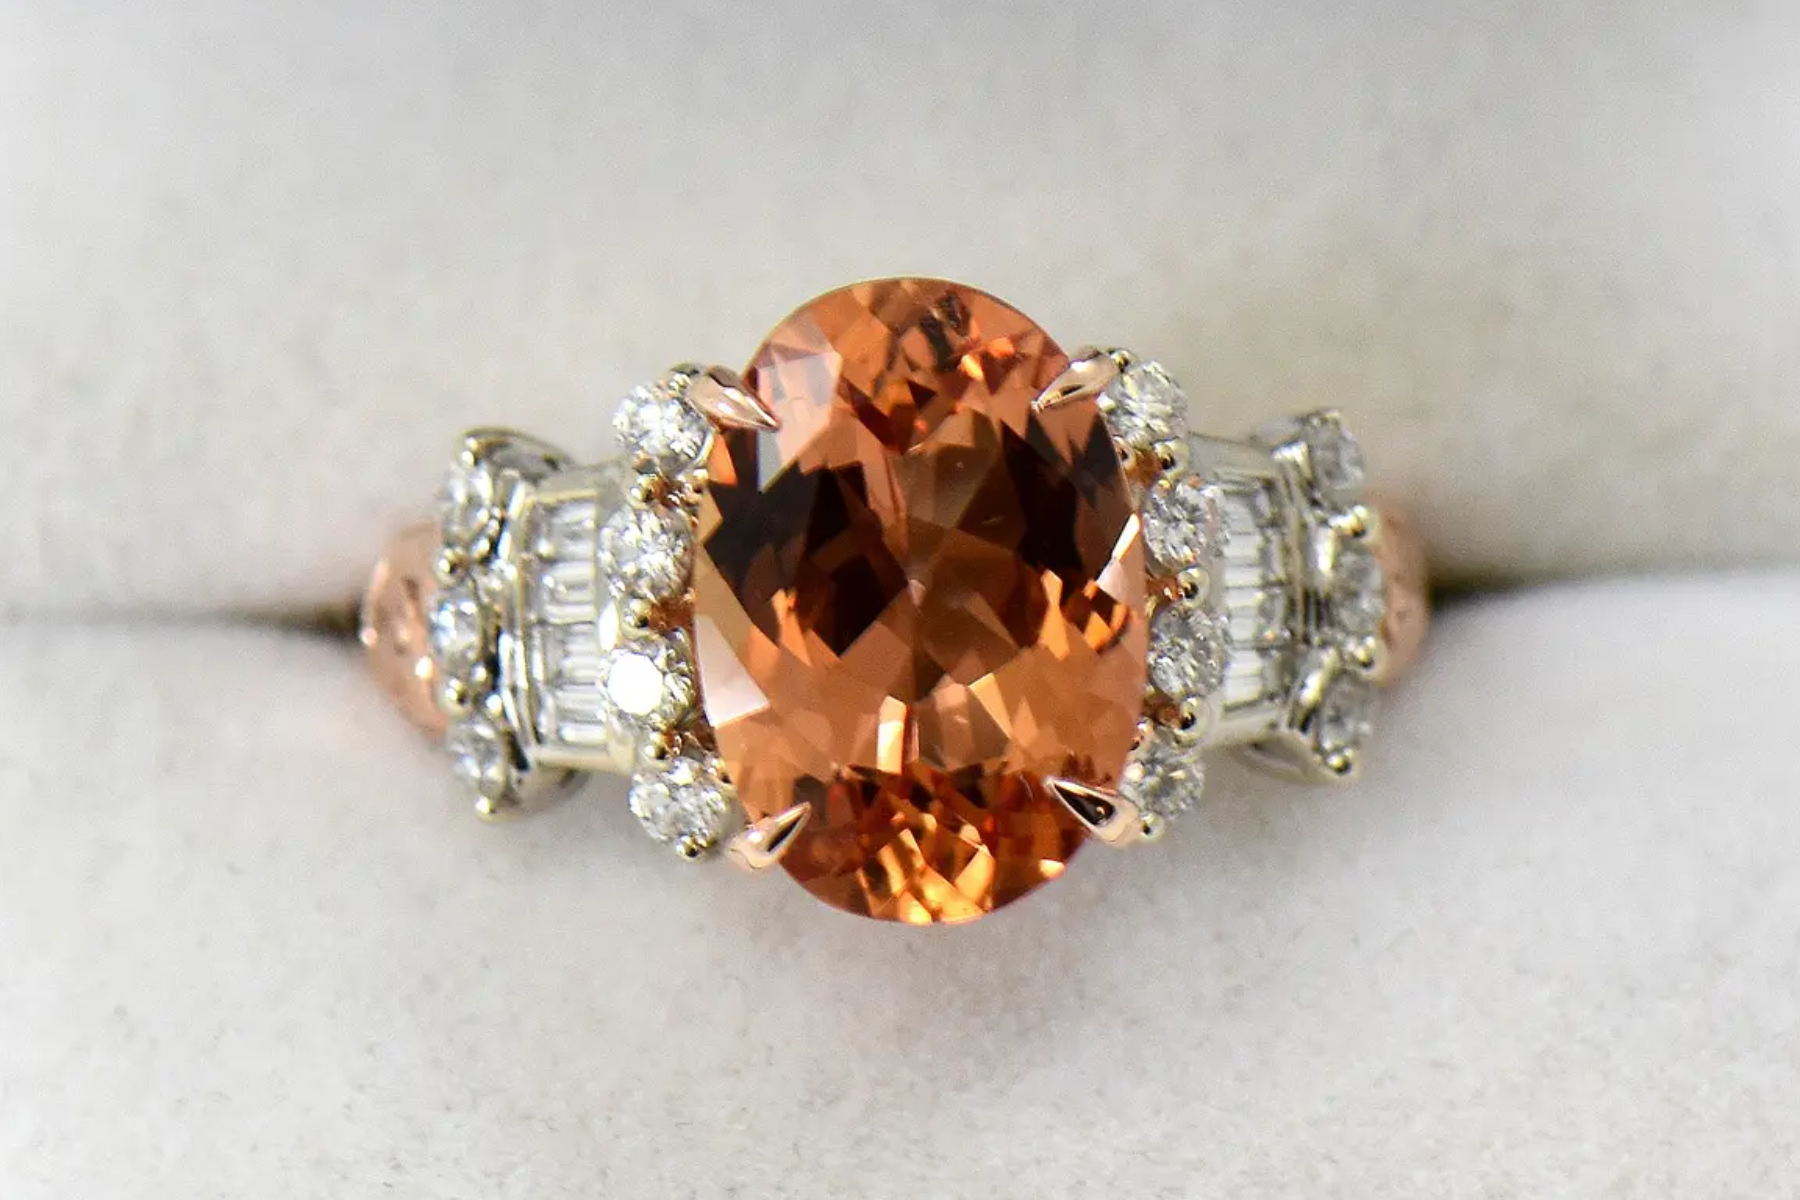 An oblong topaz stone on a sterling silver and diamond ring